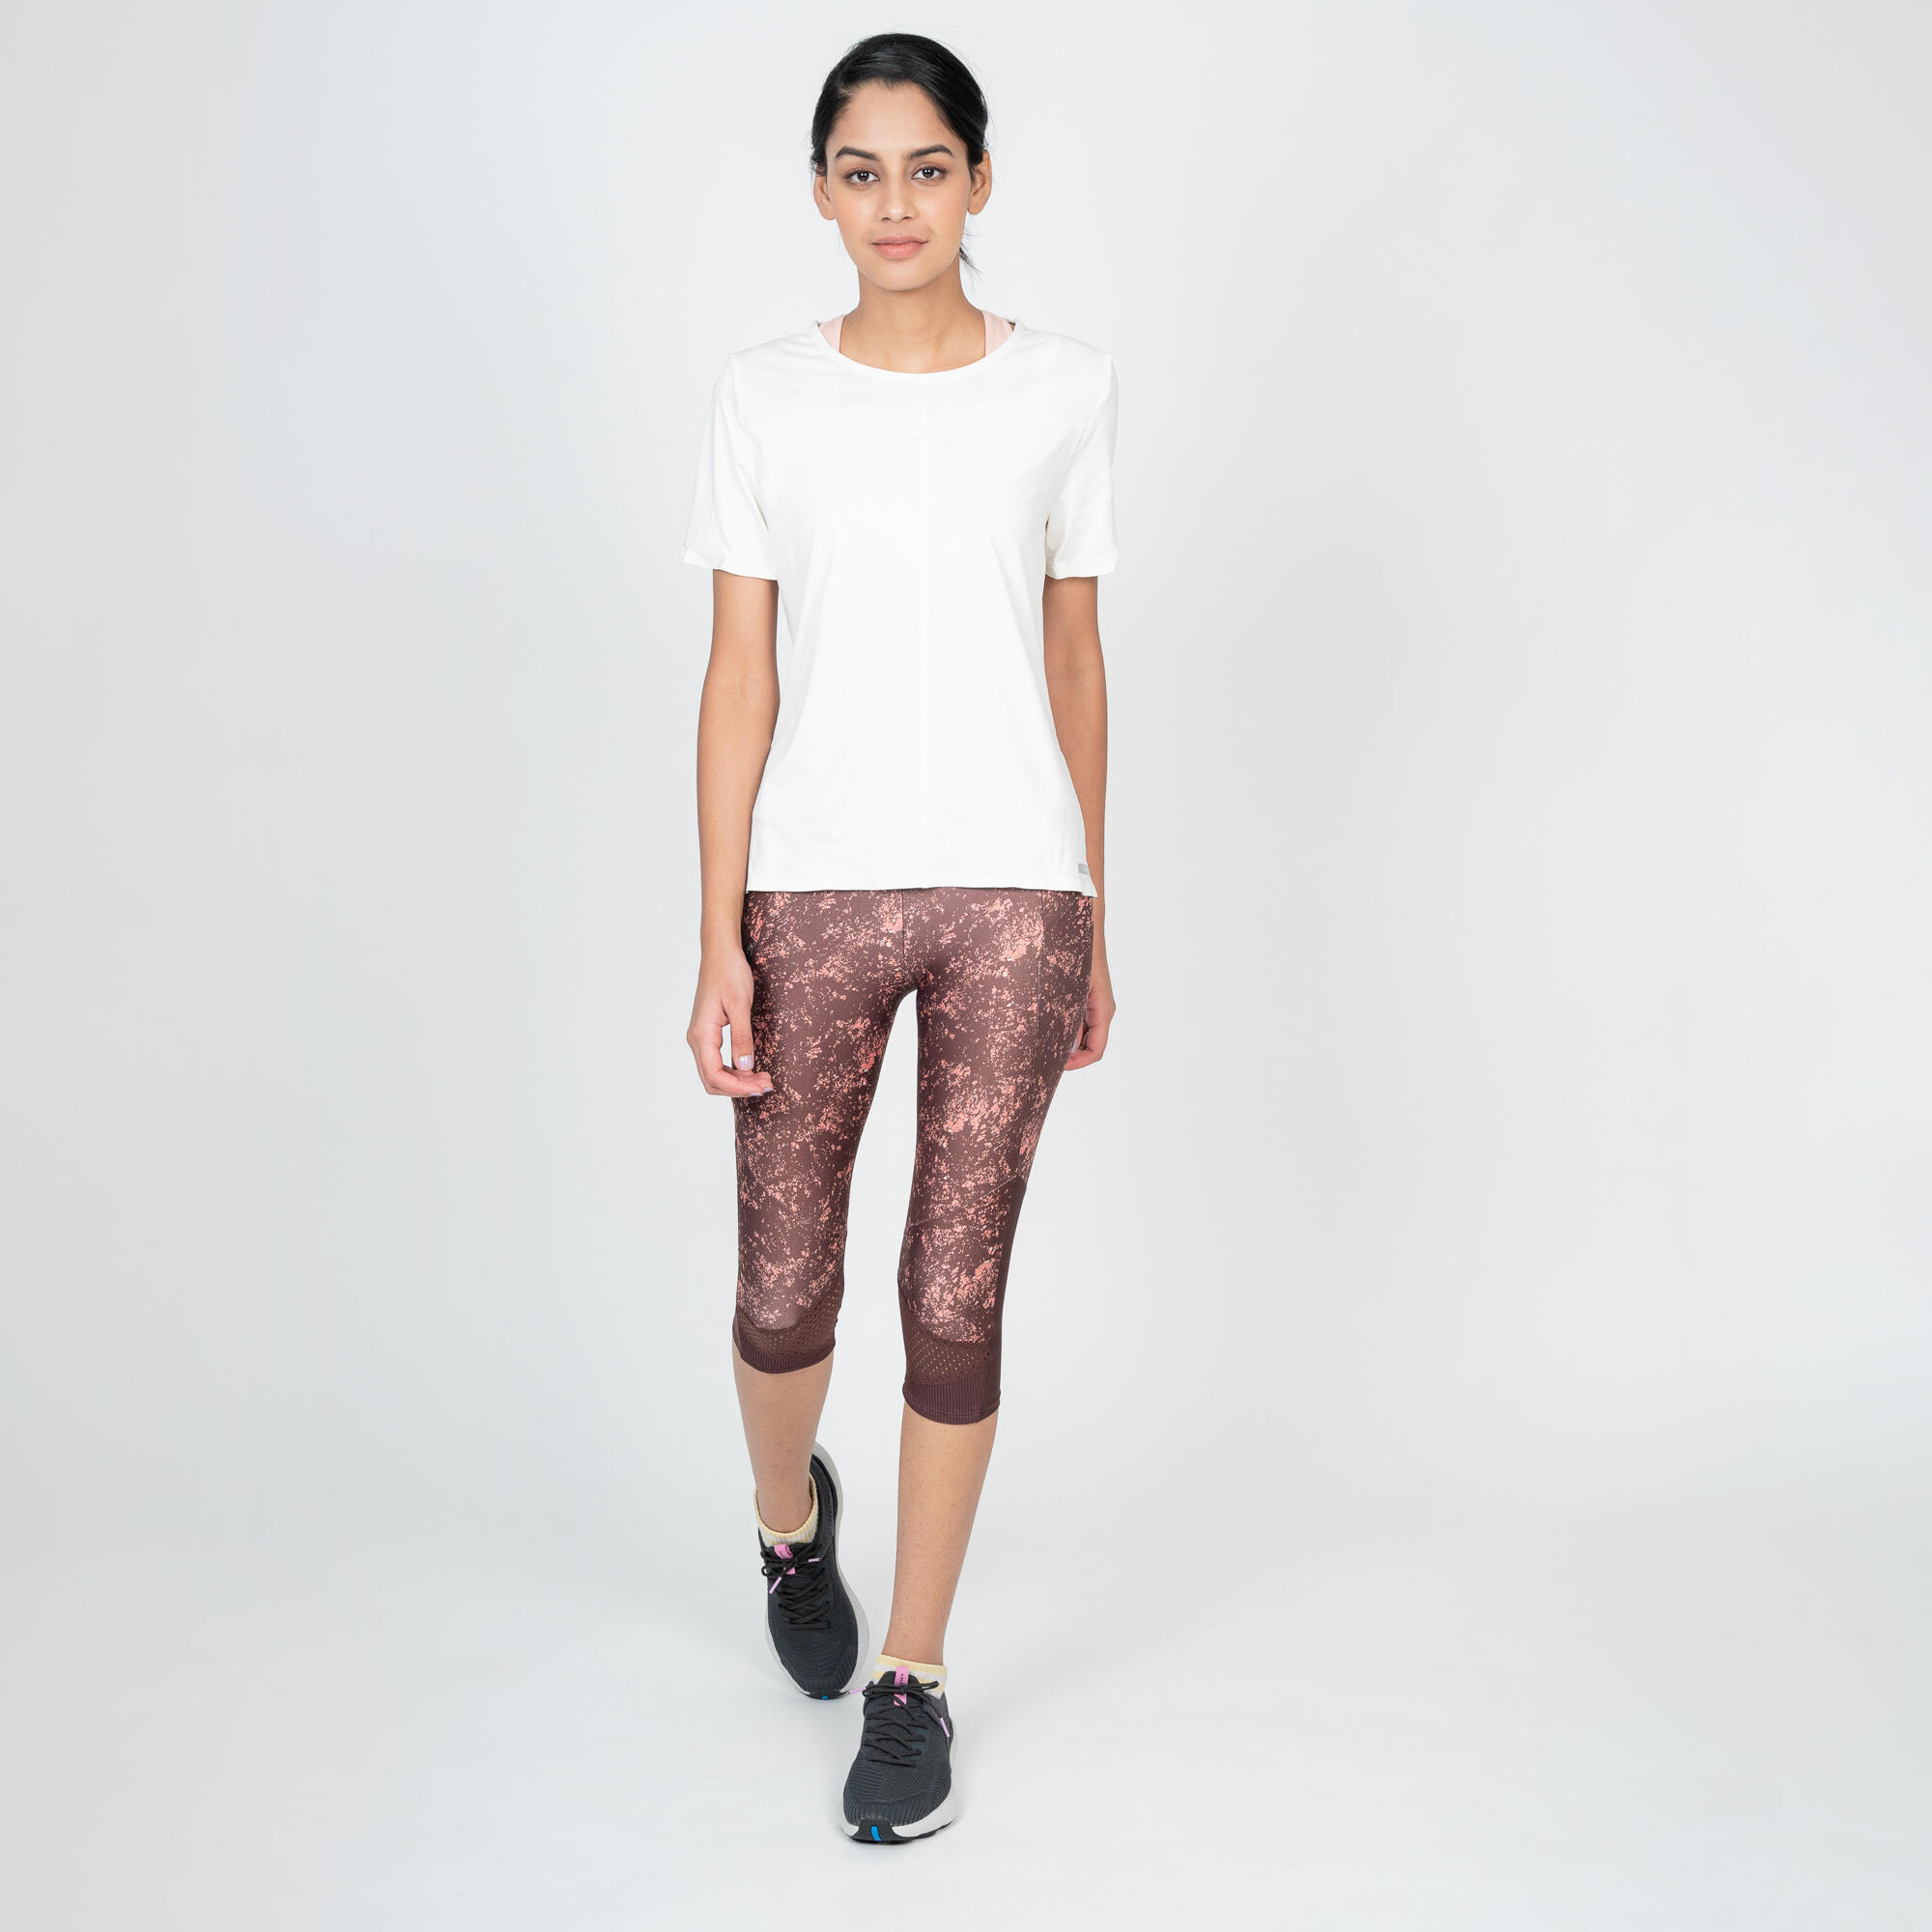 Running Compressive Pockets Legging as comfortable as your favorite brand,  crafted sustainably and ethically with eco-friendly materials. – Rose Buddha